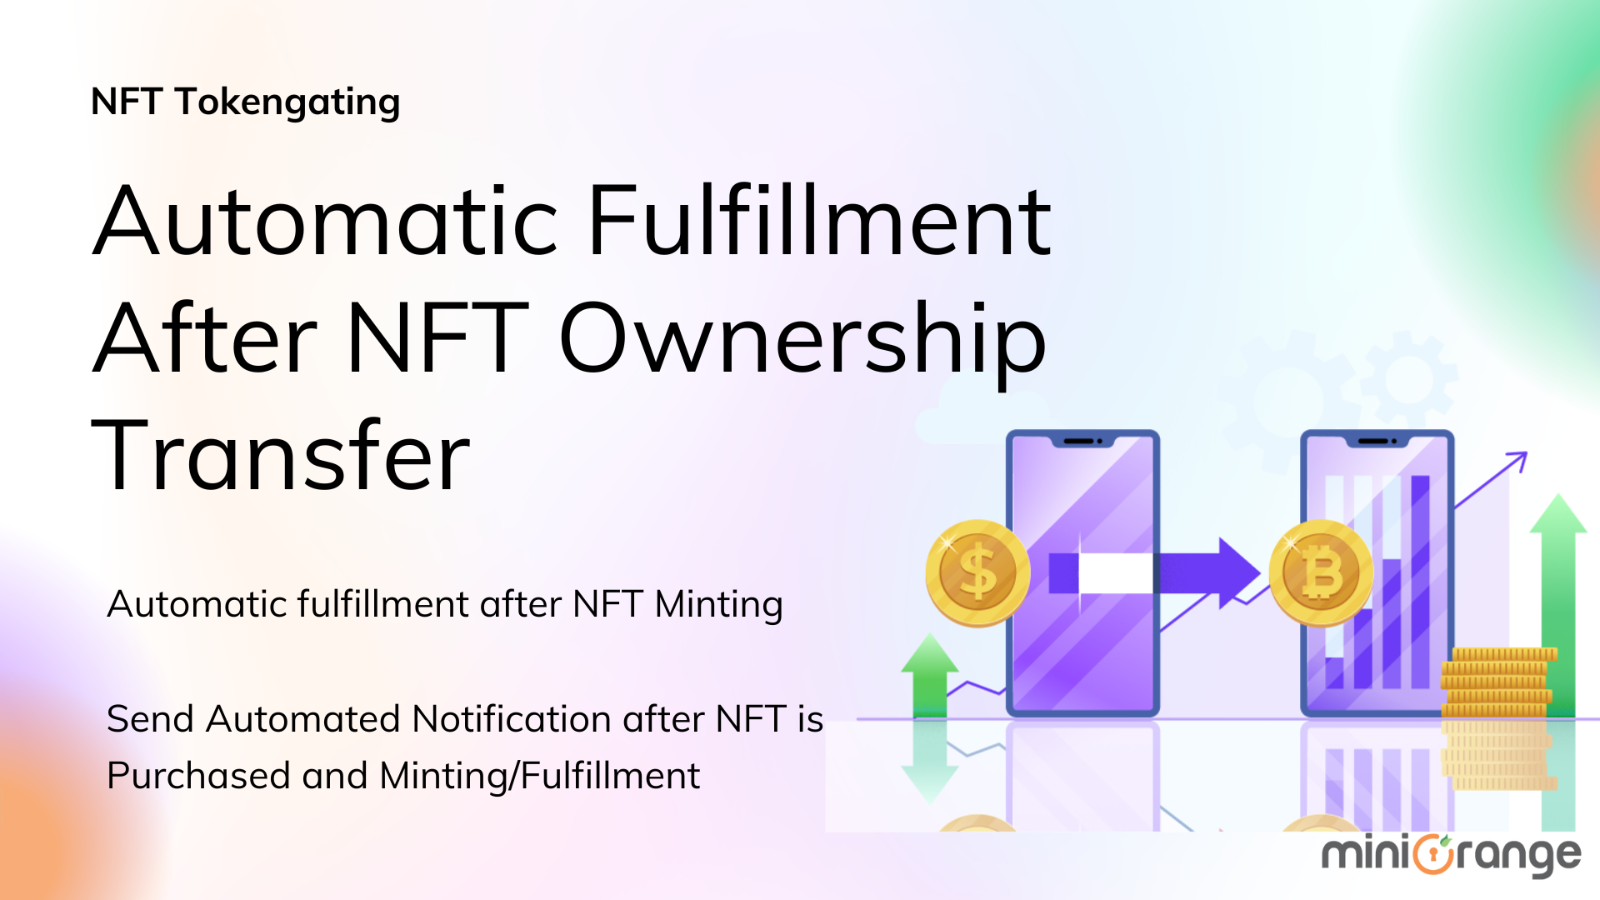 Create NFT with images, video, audio, and more - all in one NFT